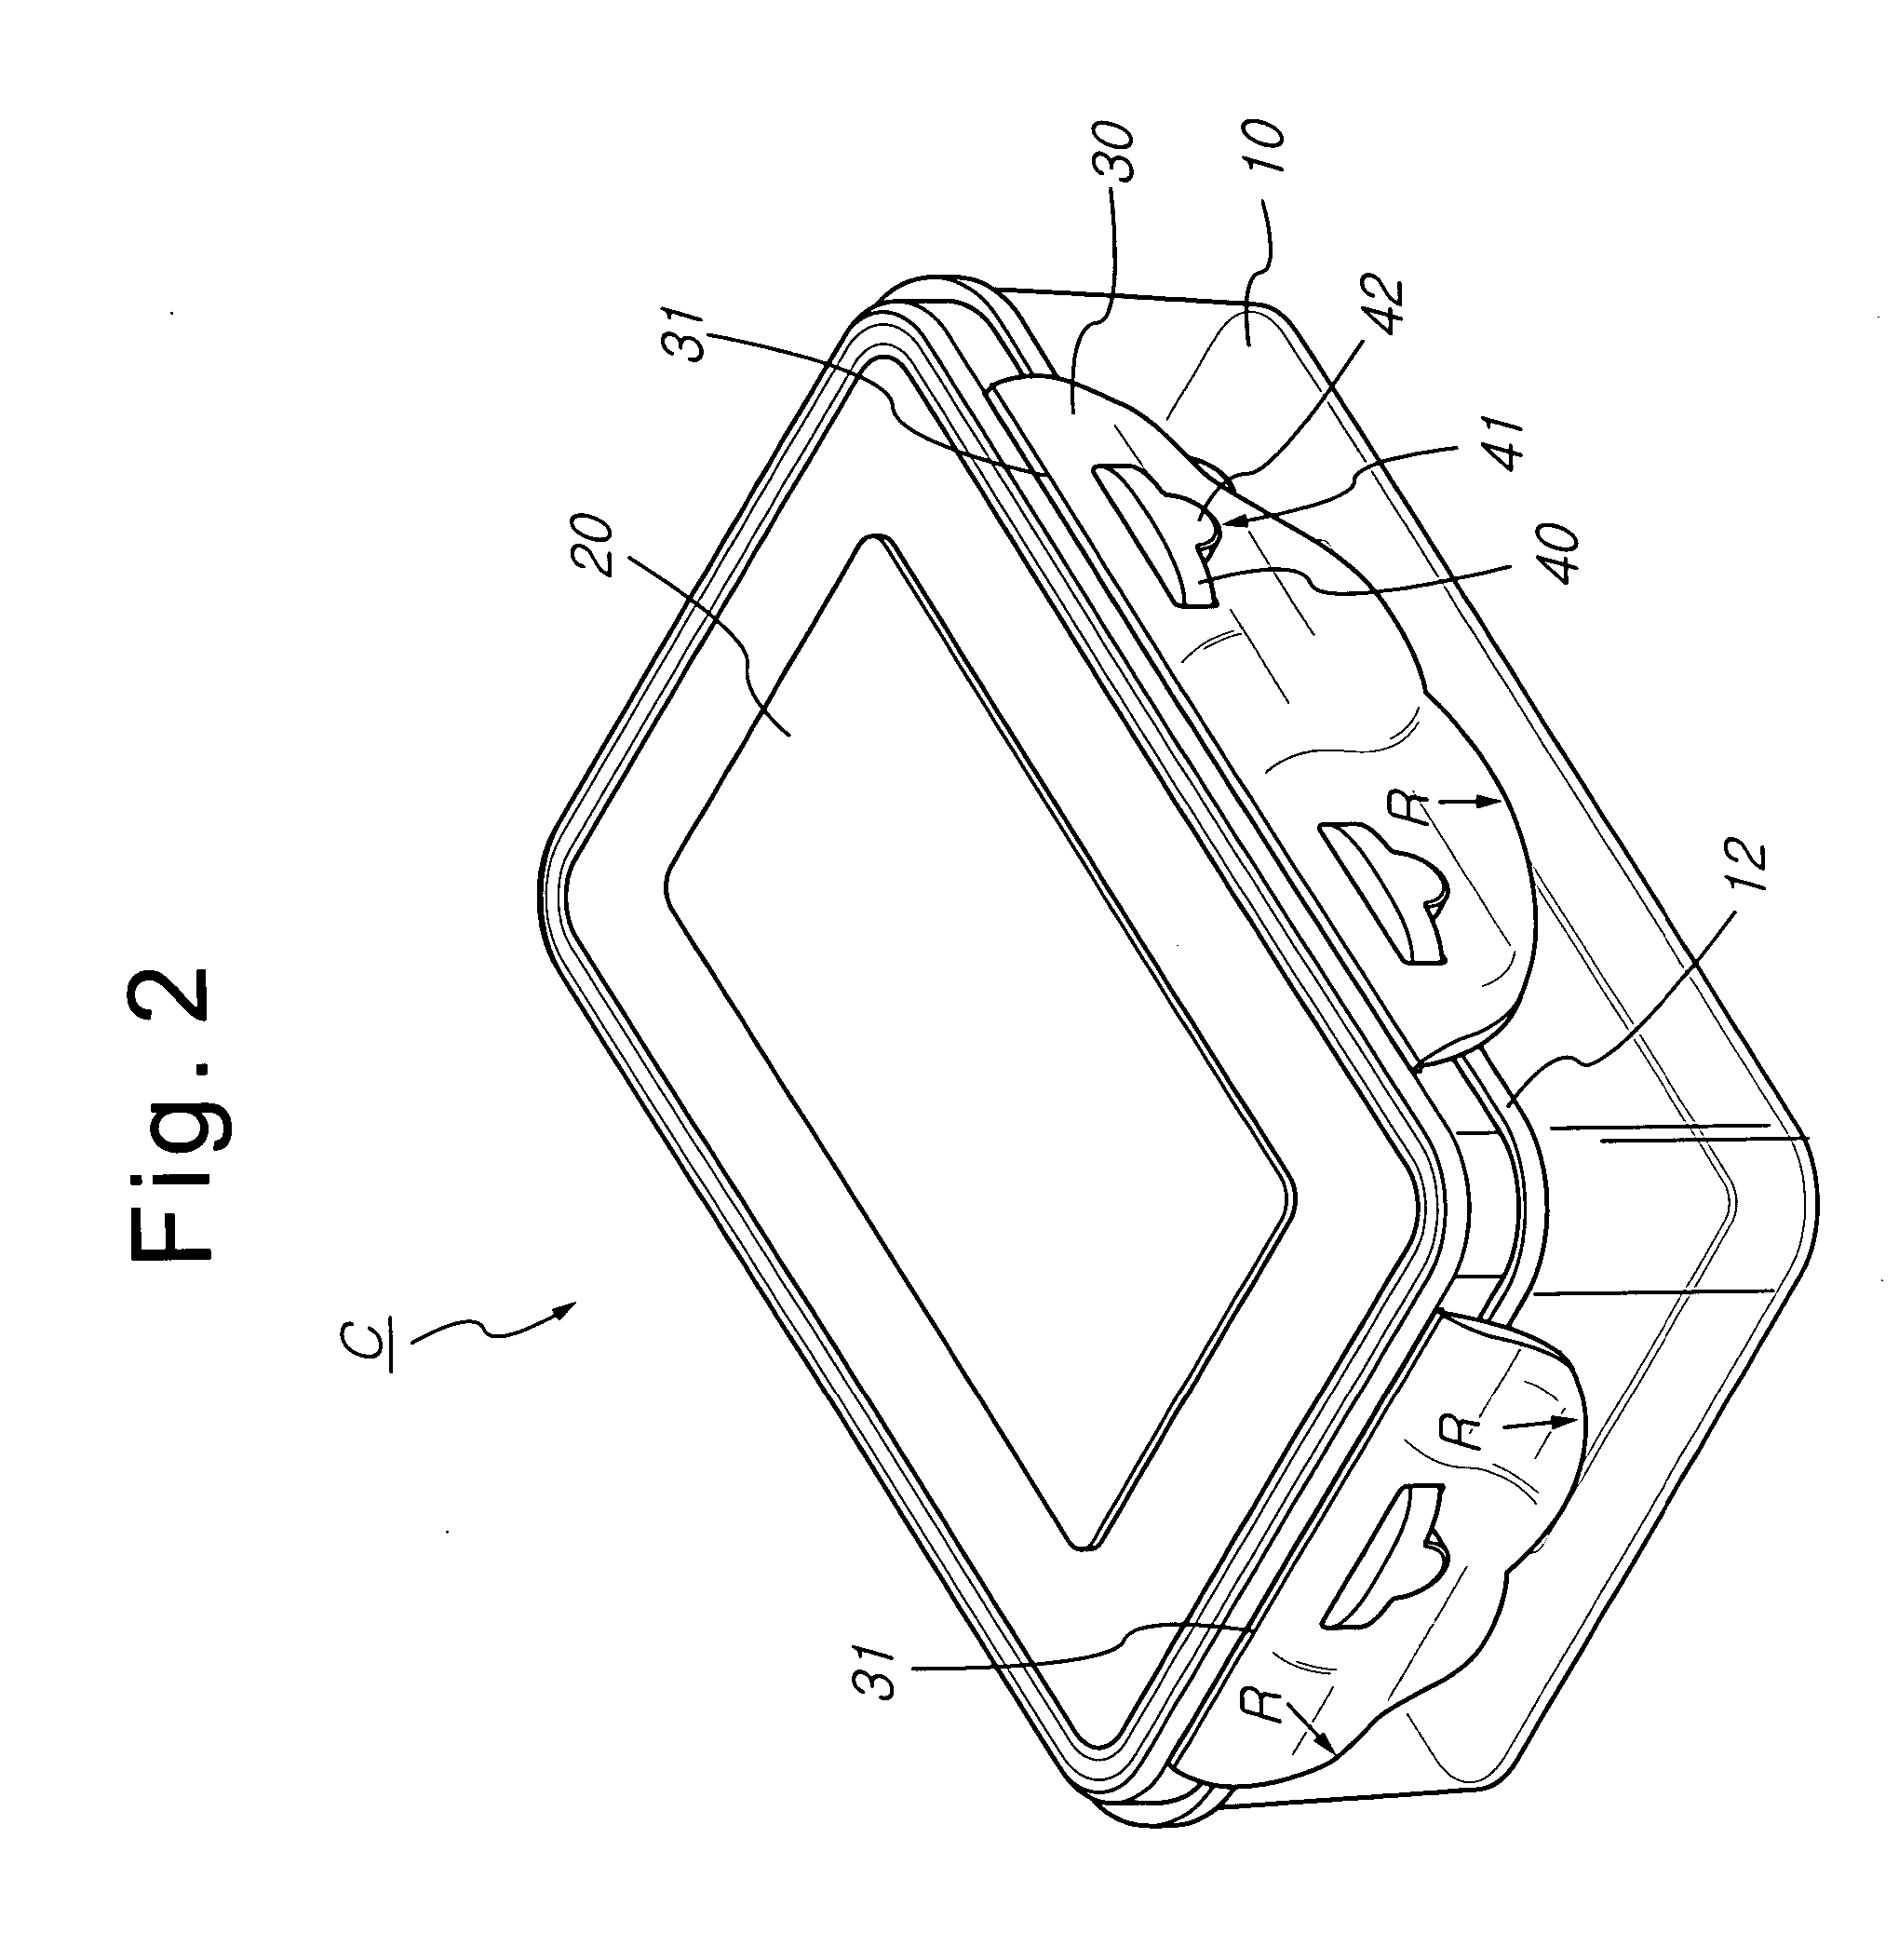 Fastening structure of airtight container